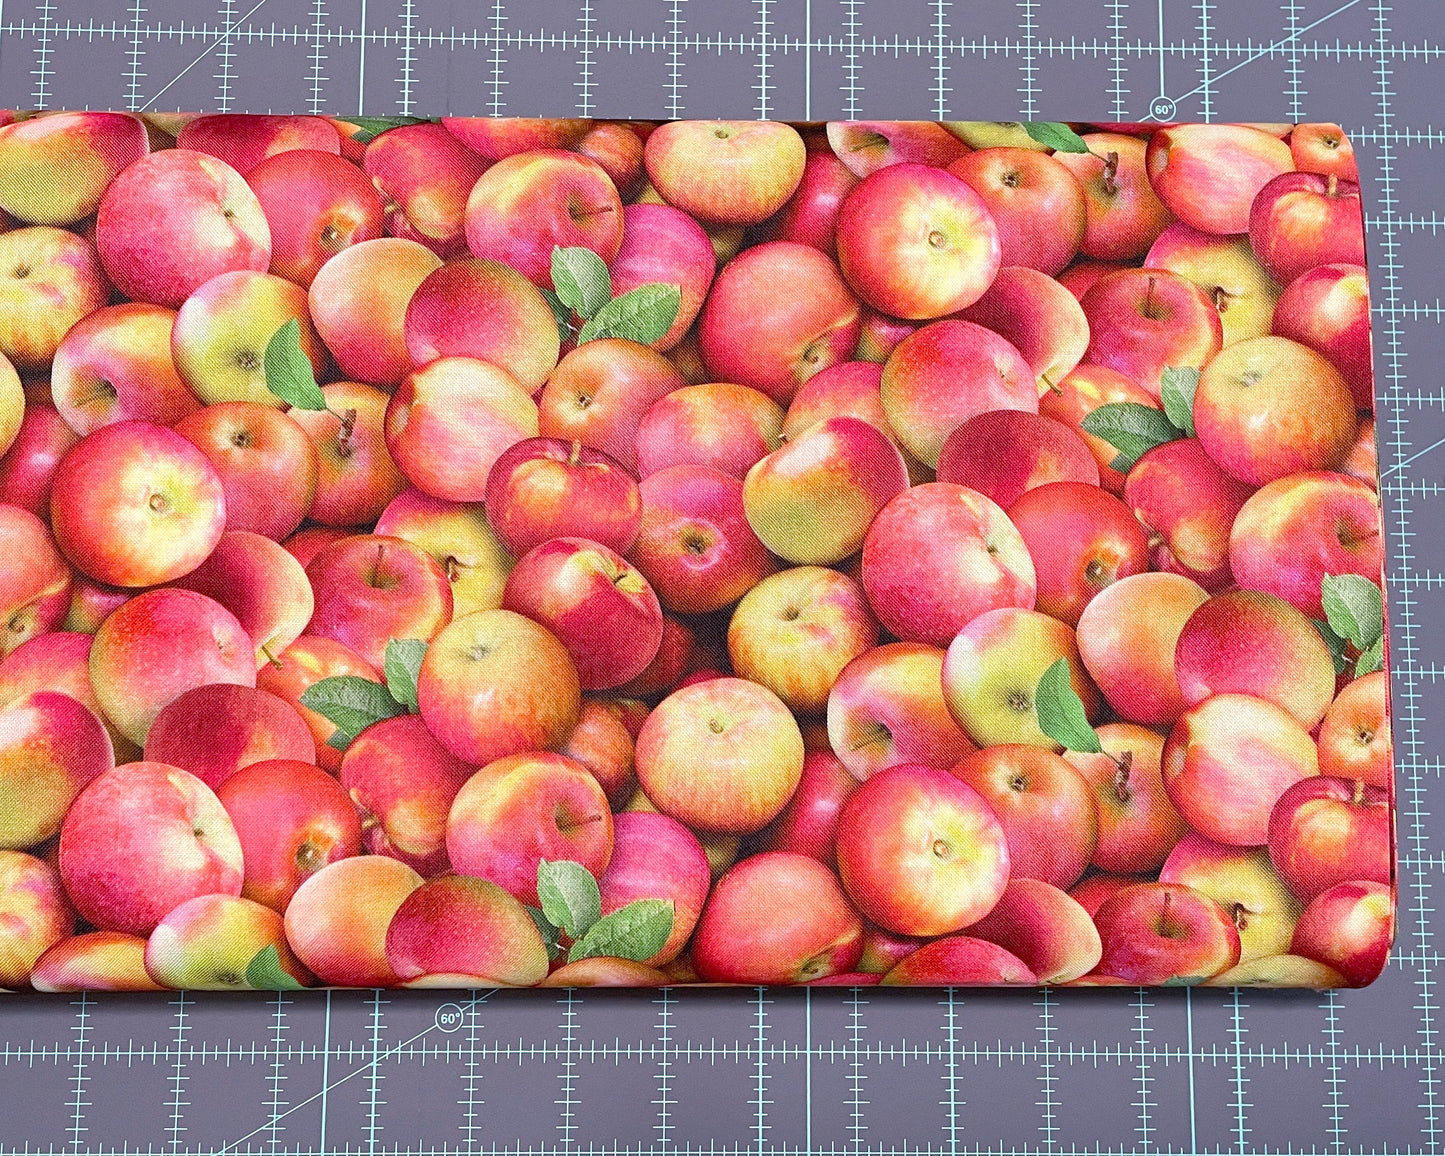 Apple Fabric - Food Festival collection by Elizabeth Studios - 100% Cotton Fabric - 641Multi Food theme Healthy Fruit Snack - Ships NEXT DAY